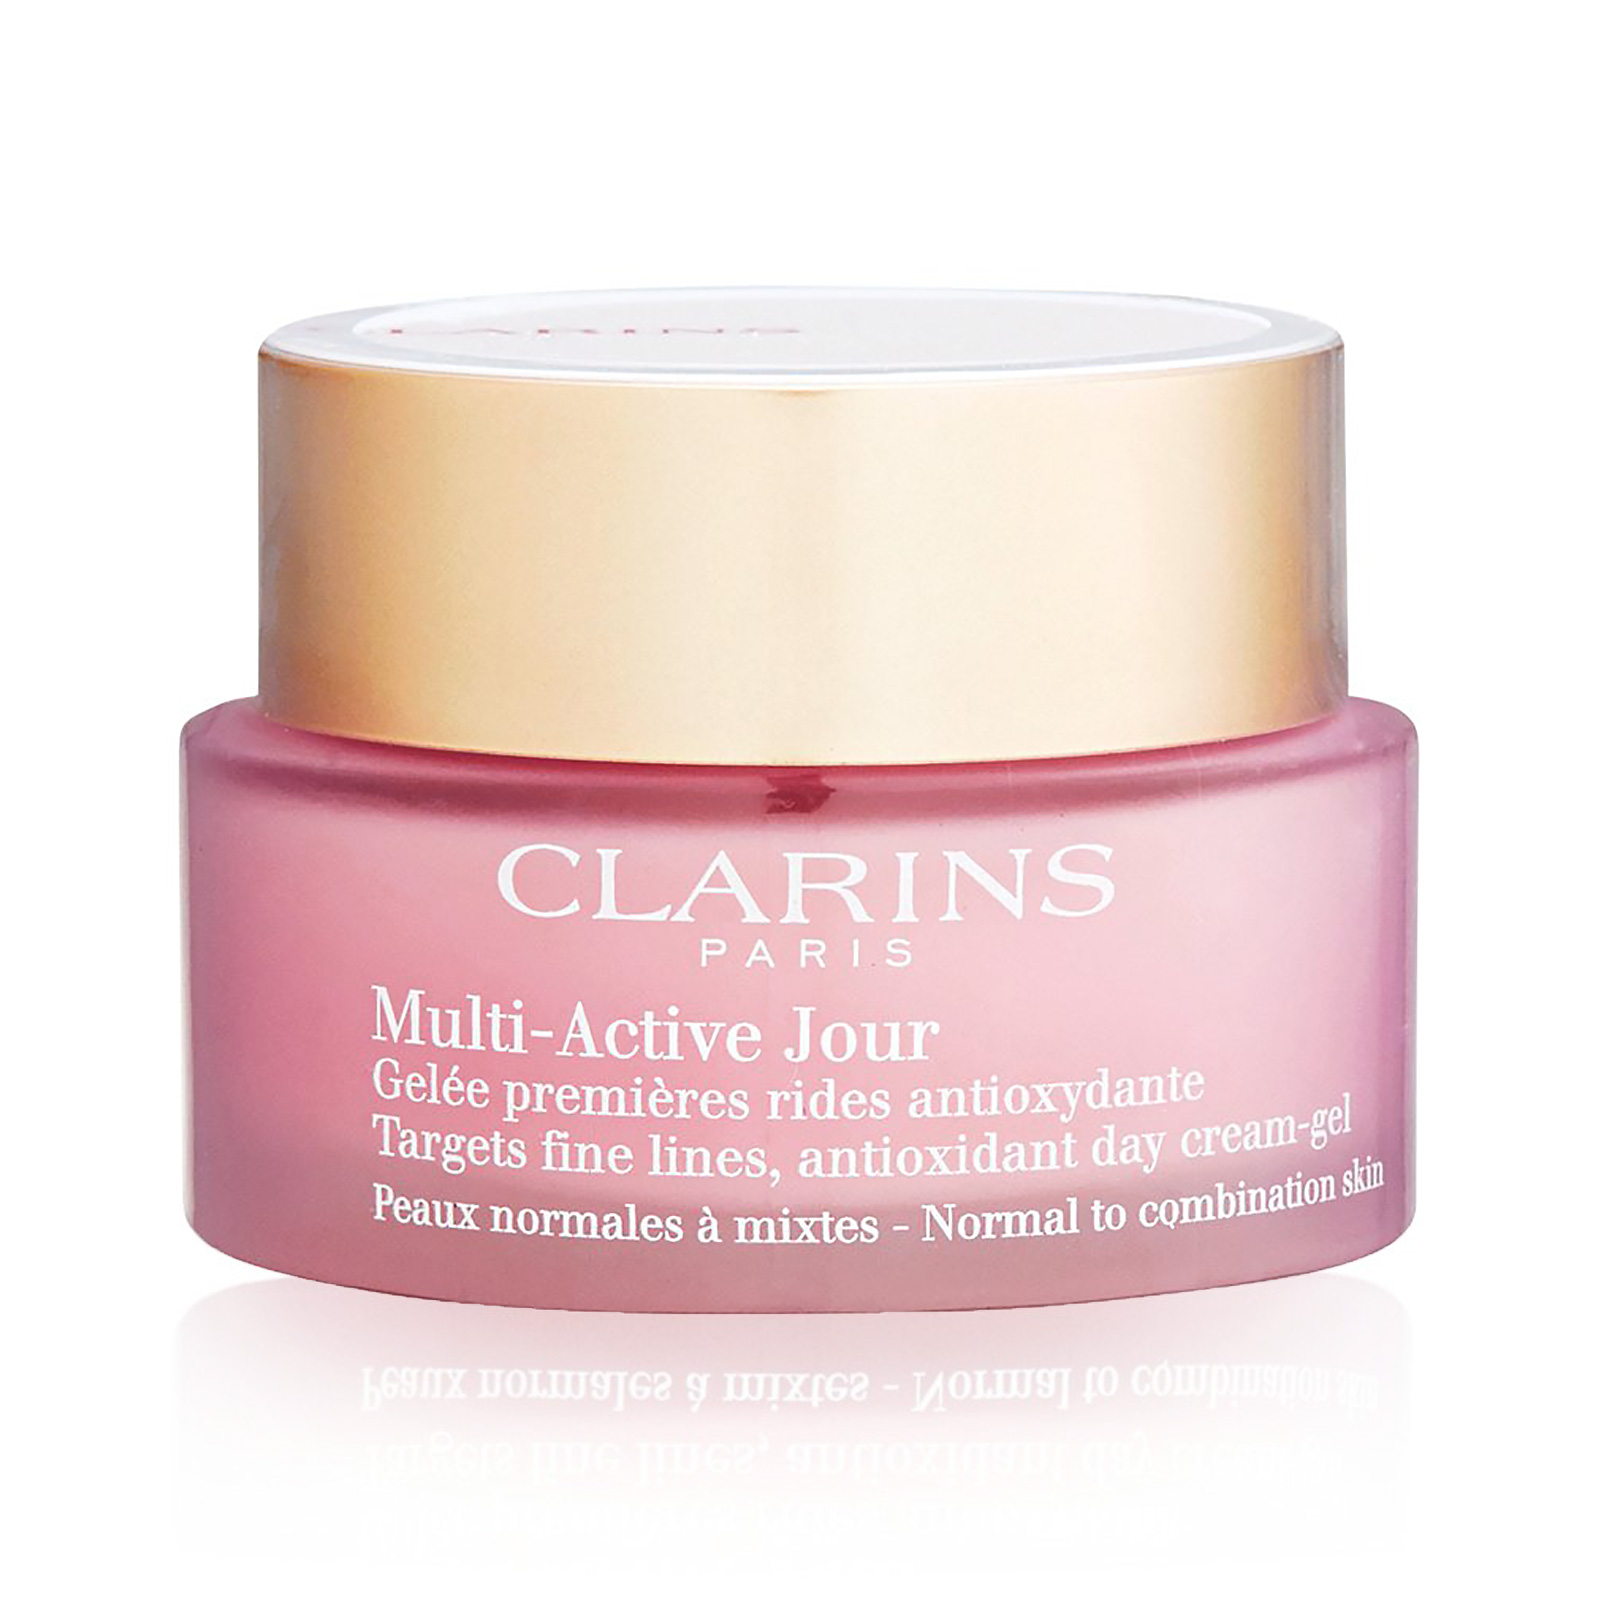 Multi-Active Day Cream-Gel (For Normal to Combination Skin)